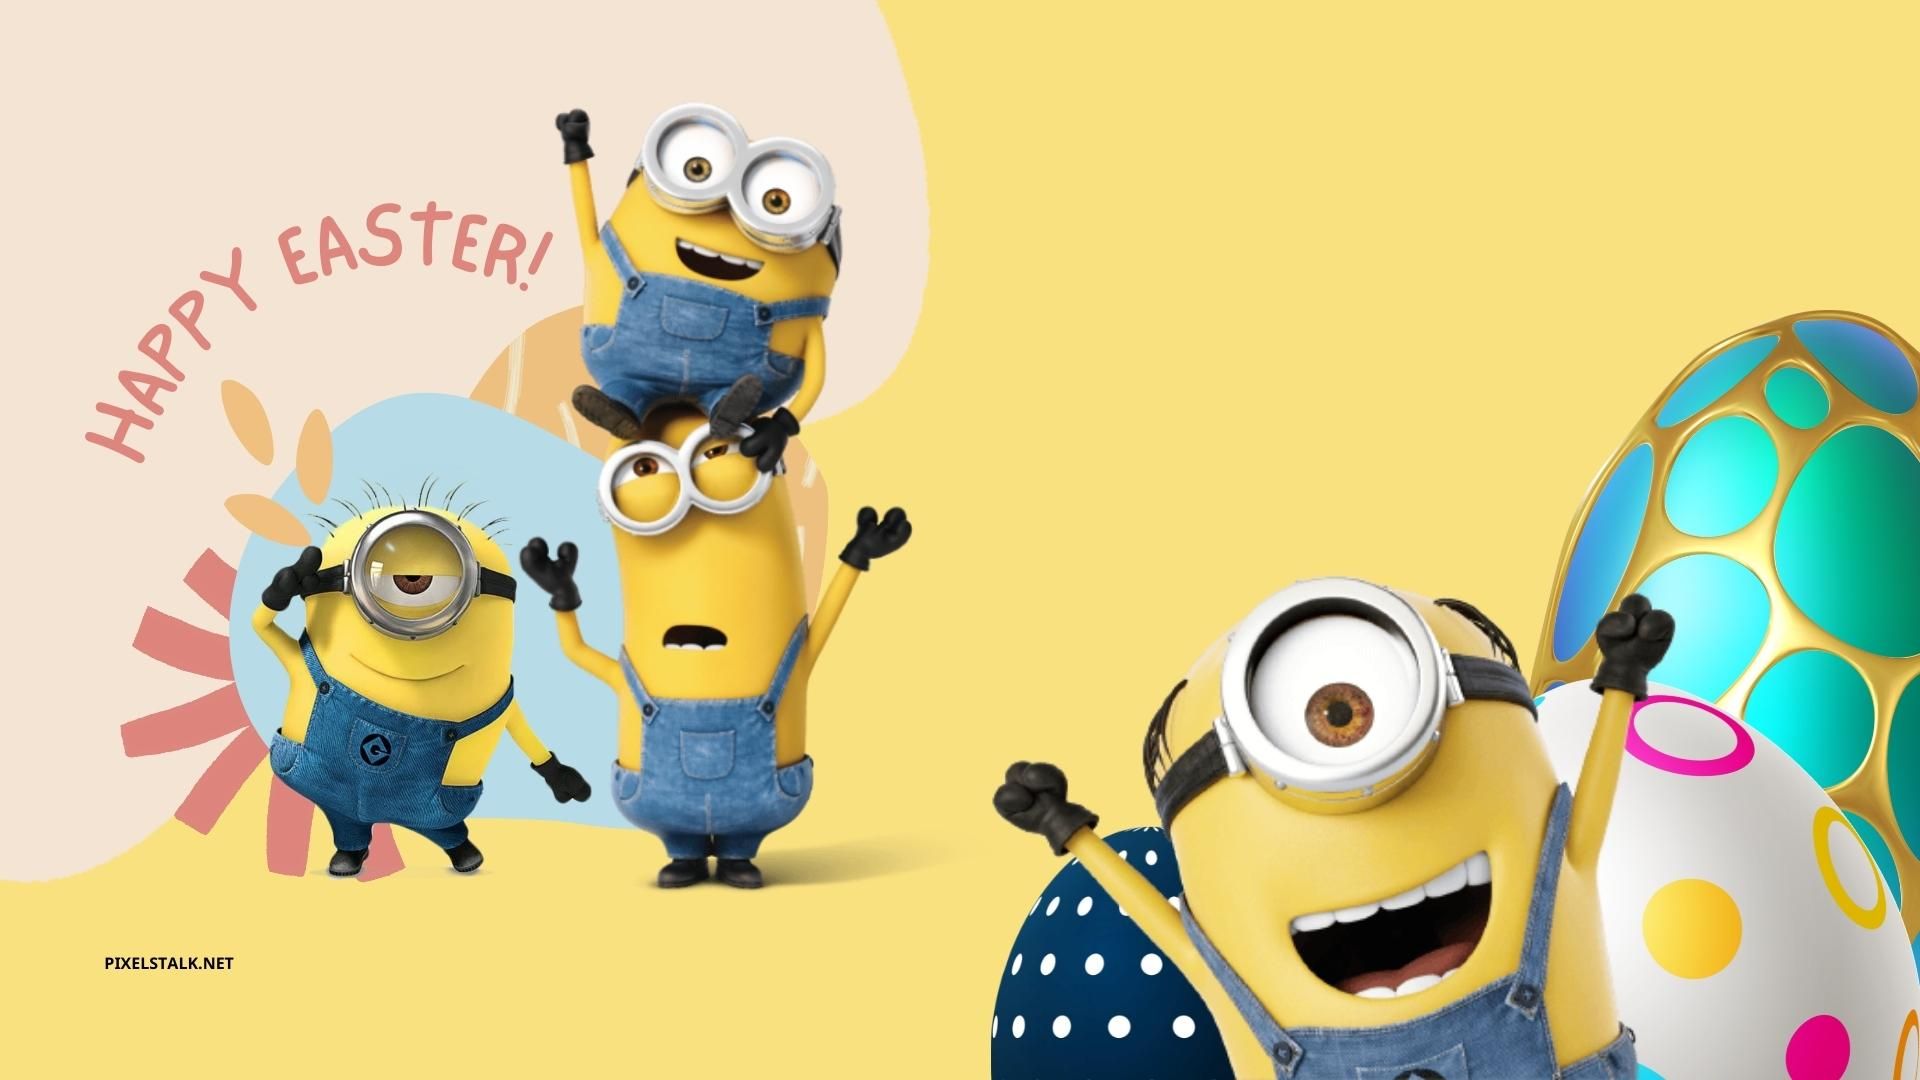 Happy Easter wallpaper with minions and an egg - Easter